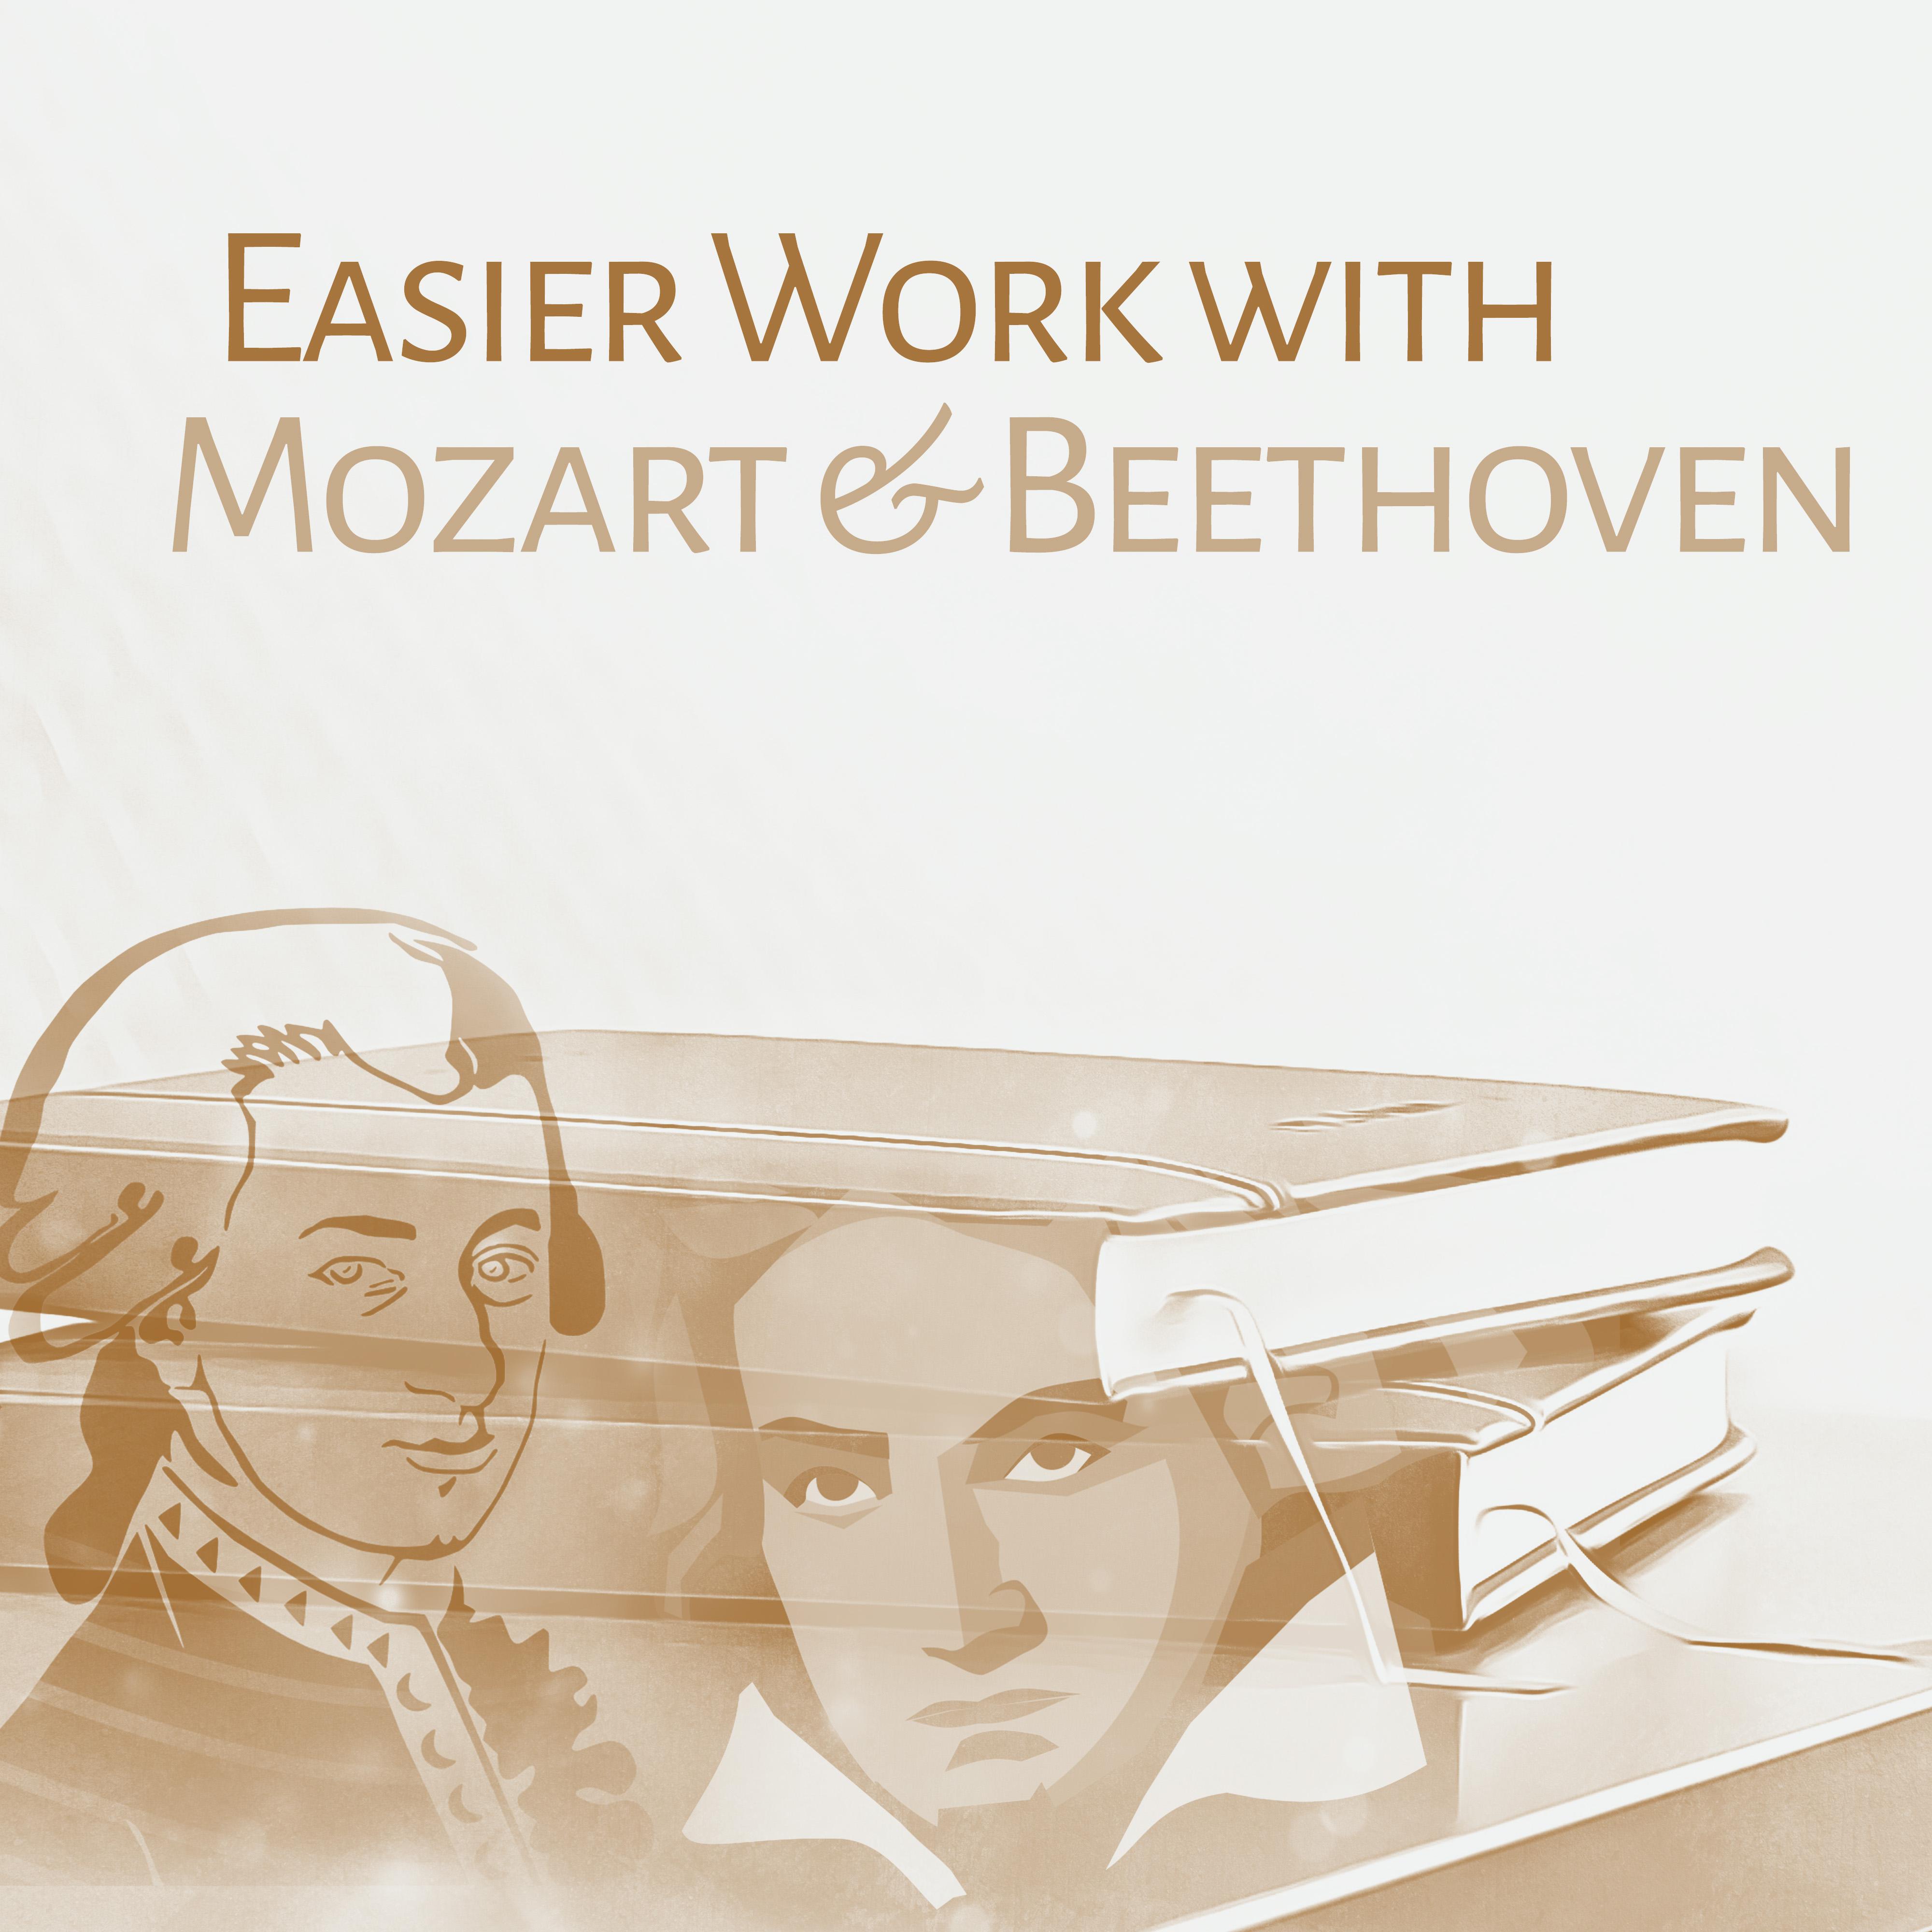 Easier Work with Mozart & Beethoven – Classical Sounds for Learning, Instrumental Songs, Deep Focus, Better Memory, Einstein Effect